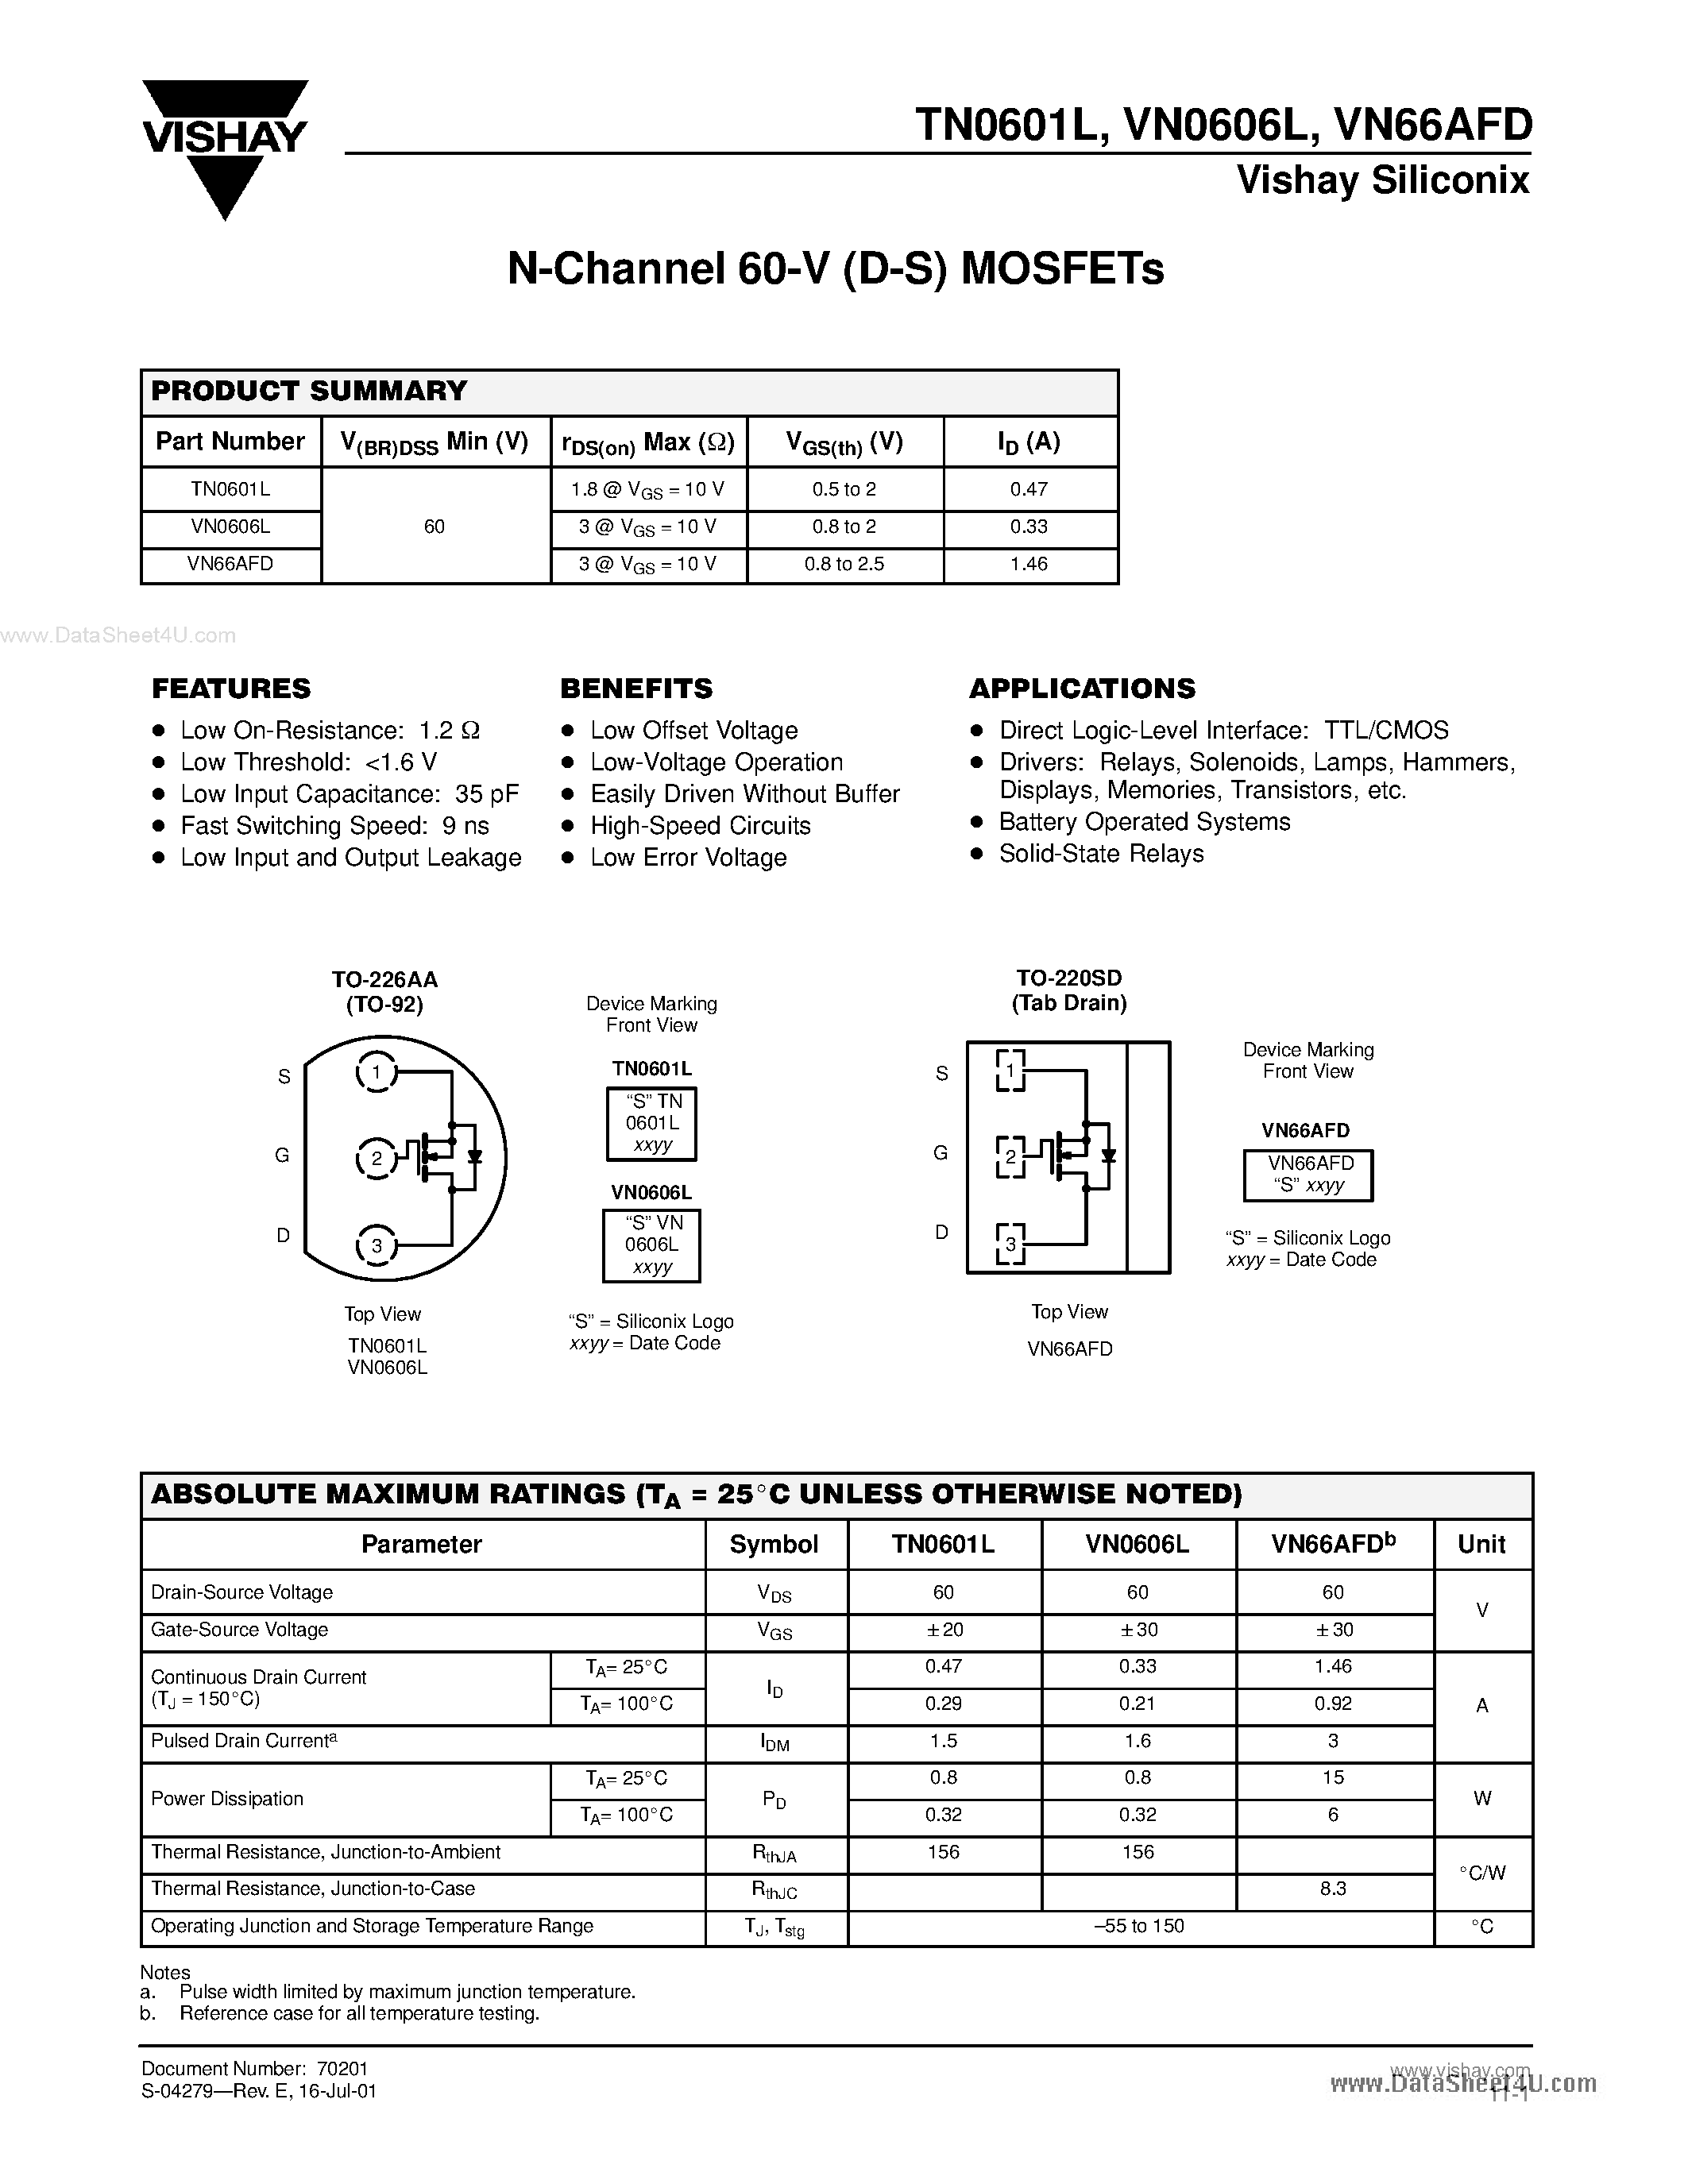 Datasheet VN66AFD - N-Channel 60-V (D-S) MOSFETs page 1